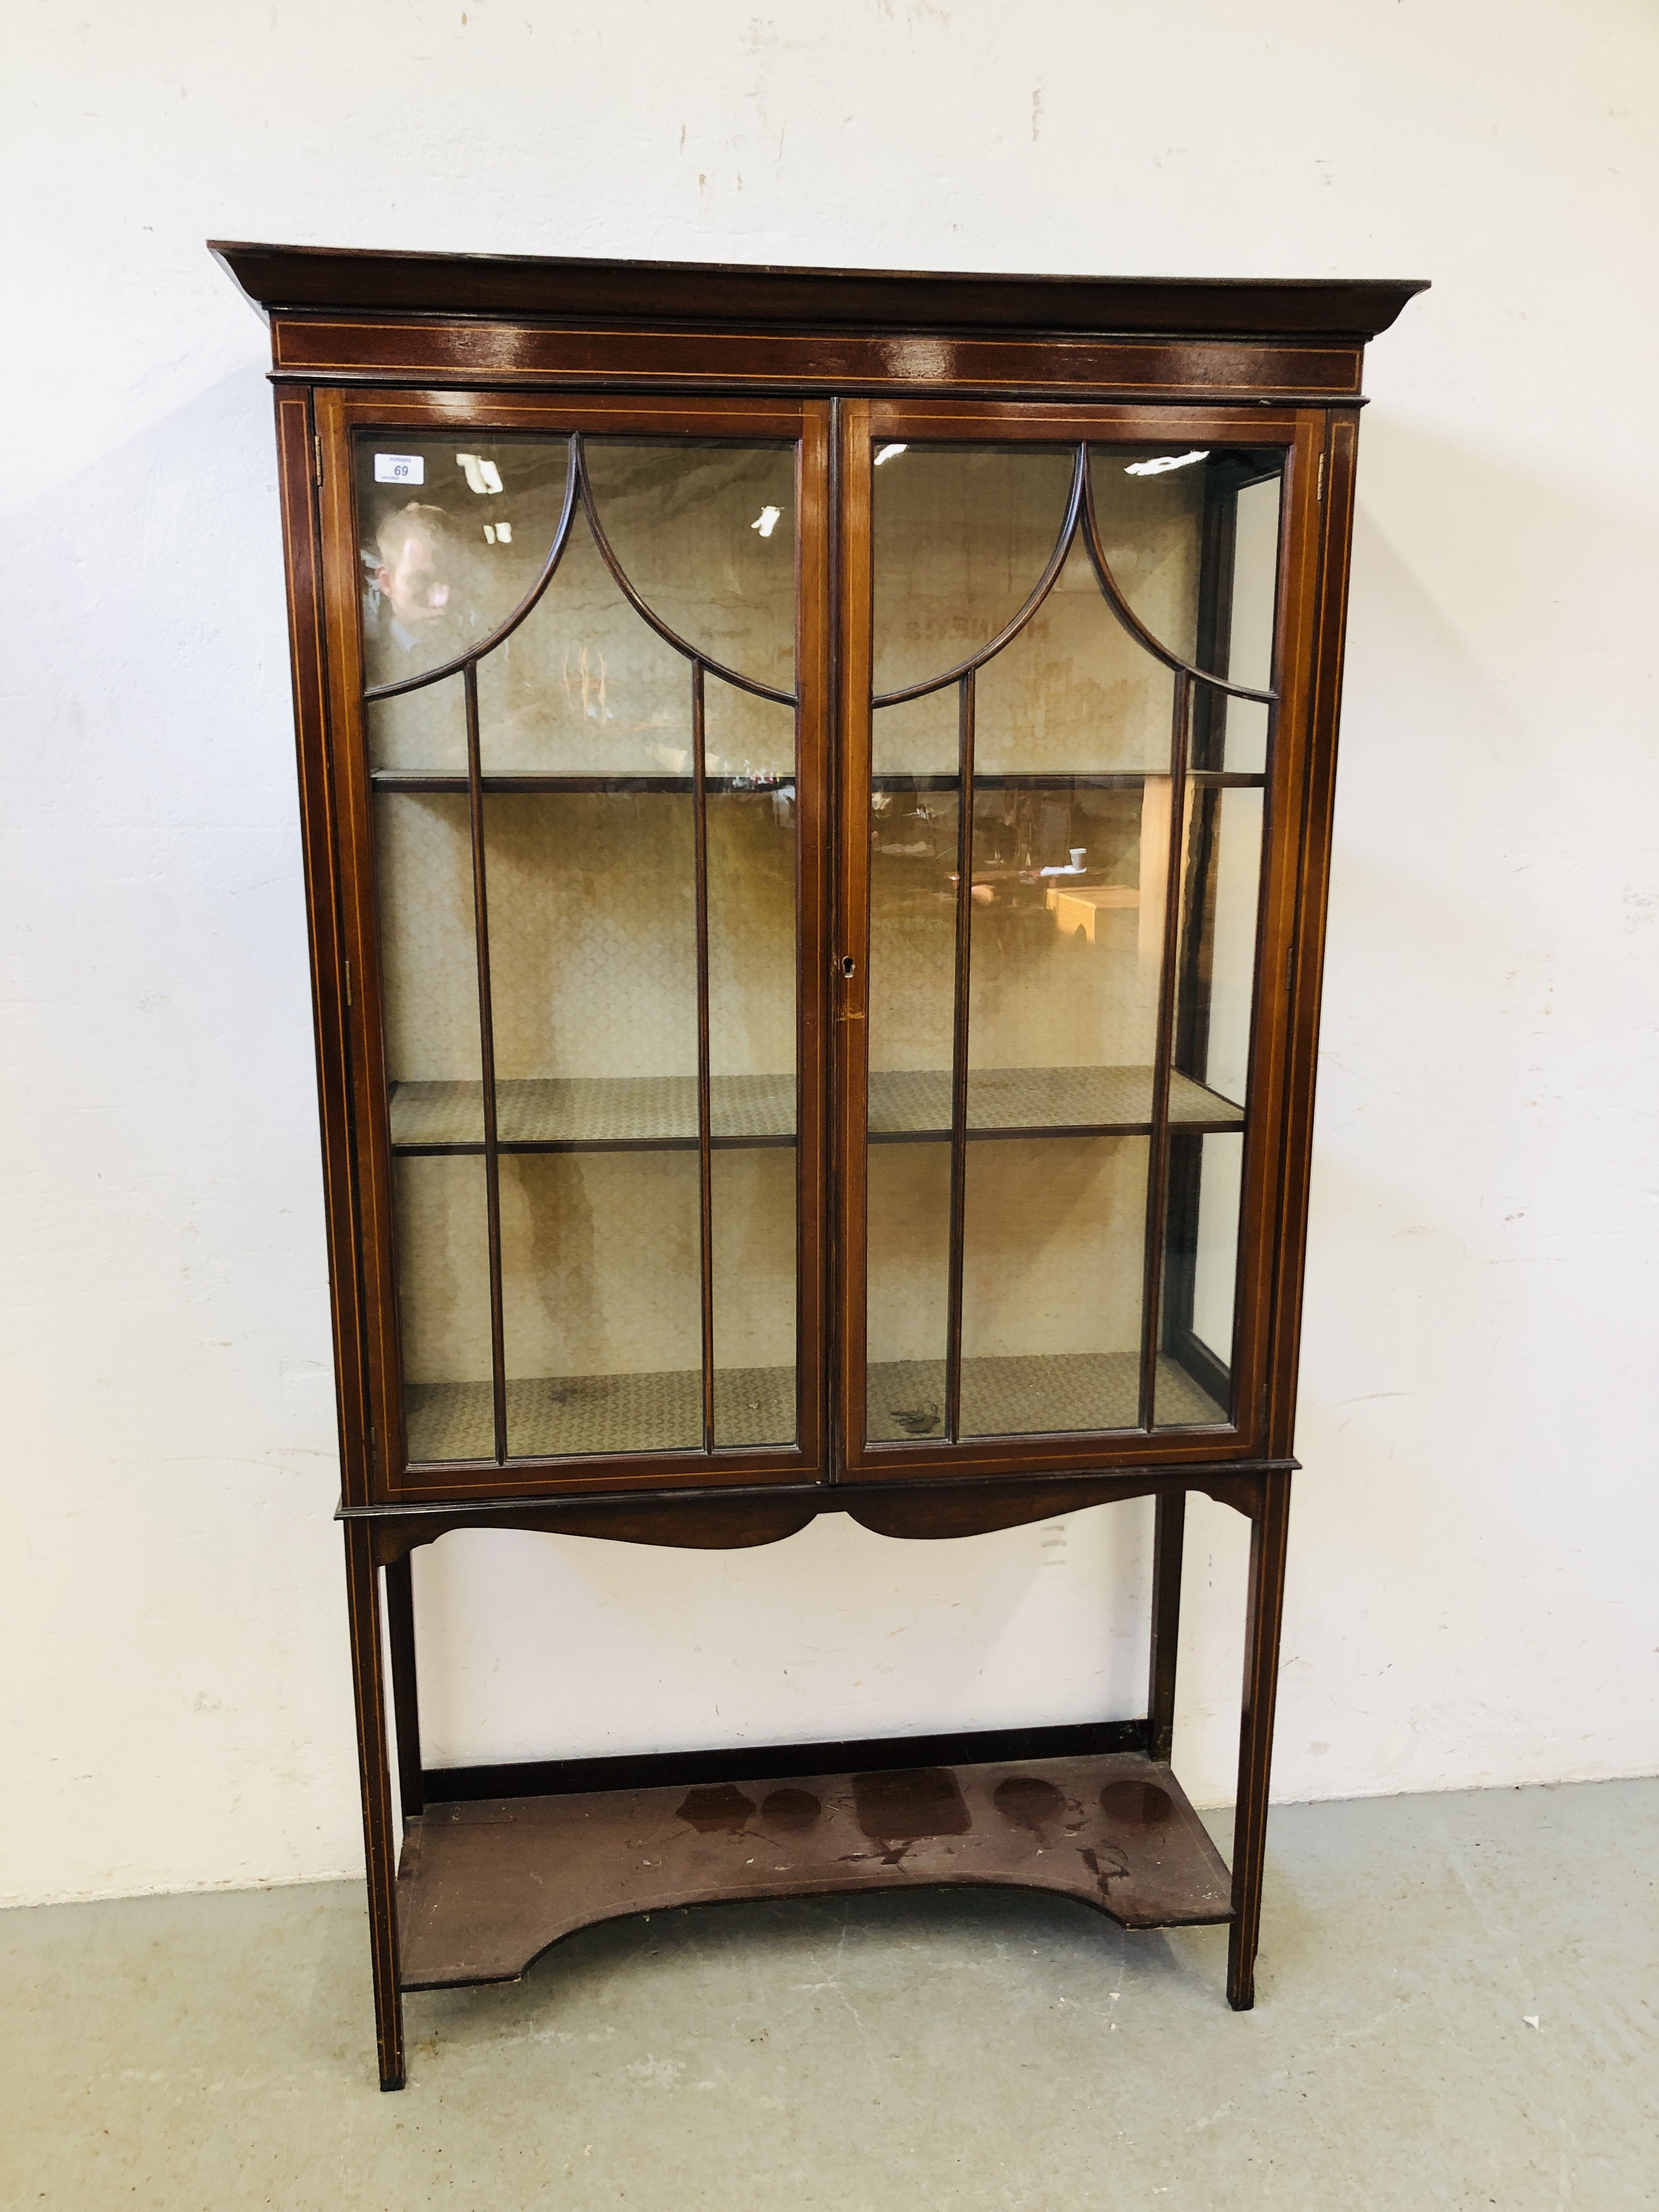 AN ANTIQUE MAHOGANY AND INLAID 2 DOOR GLAZED CABINET WITH LOWER TIER W 100CM X D 36CM X H 170CM.